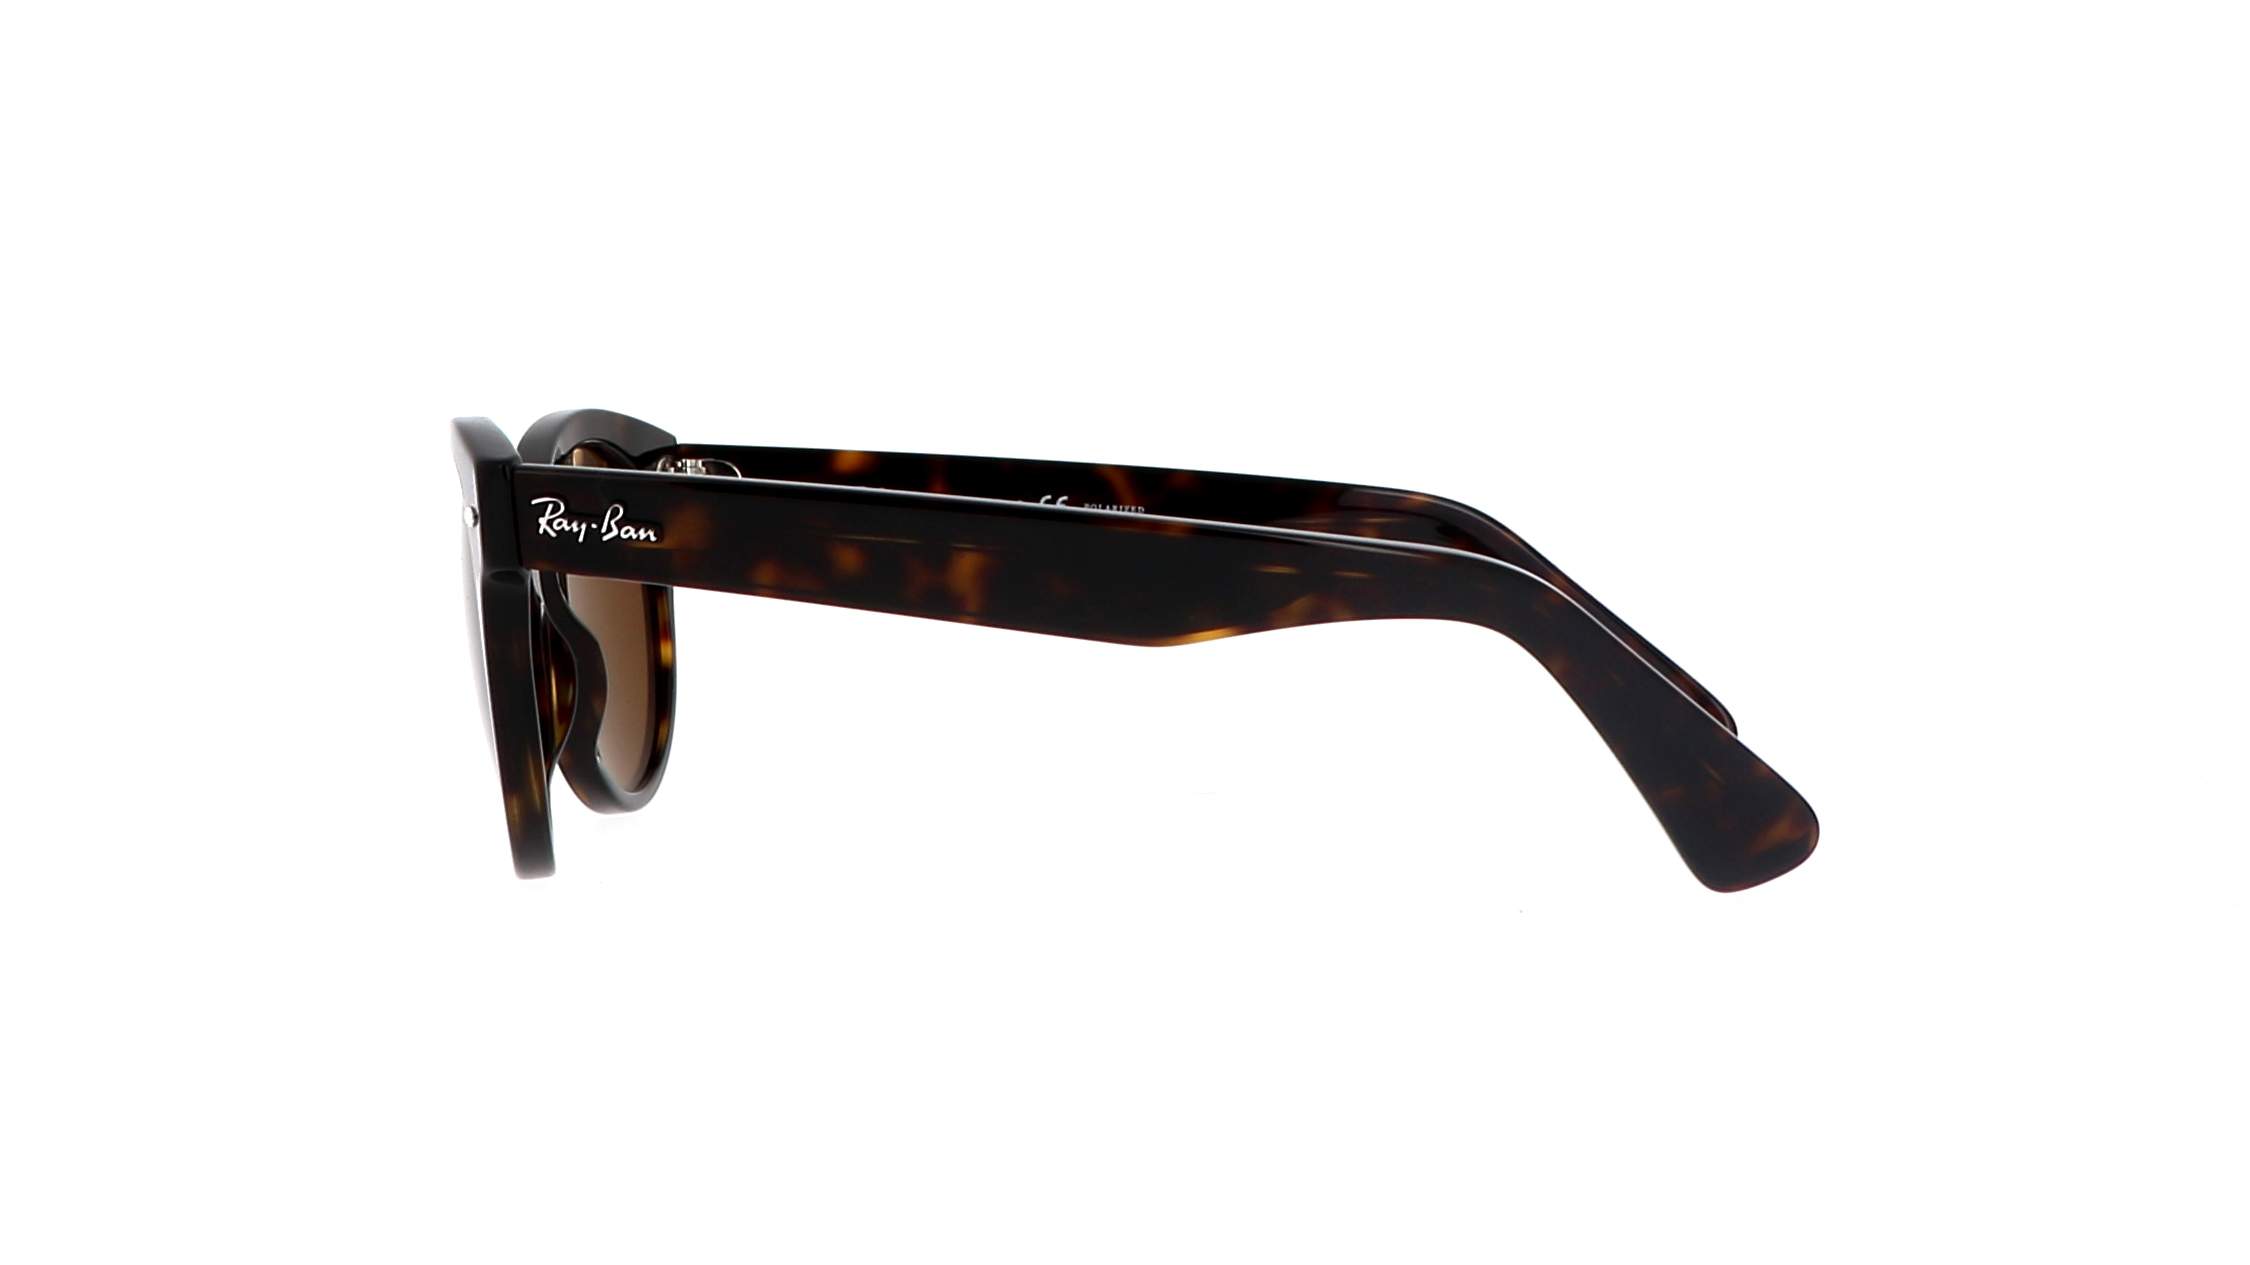 Sunglasses Ray-Ban Orion Tortoise RB2199 902/57 52-22 Polarized in ...